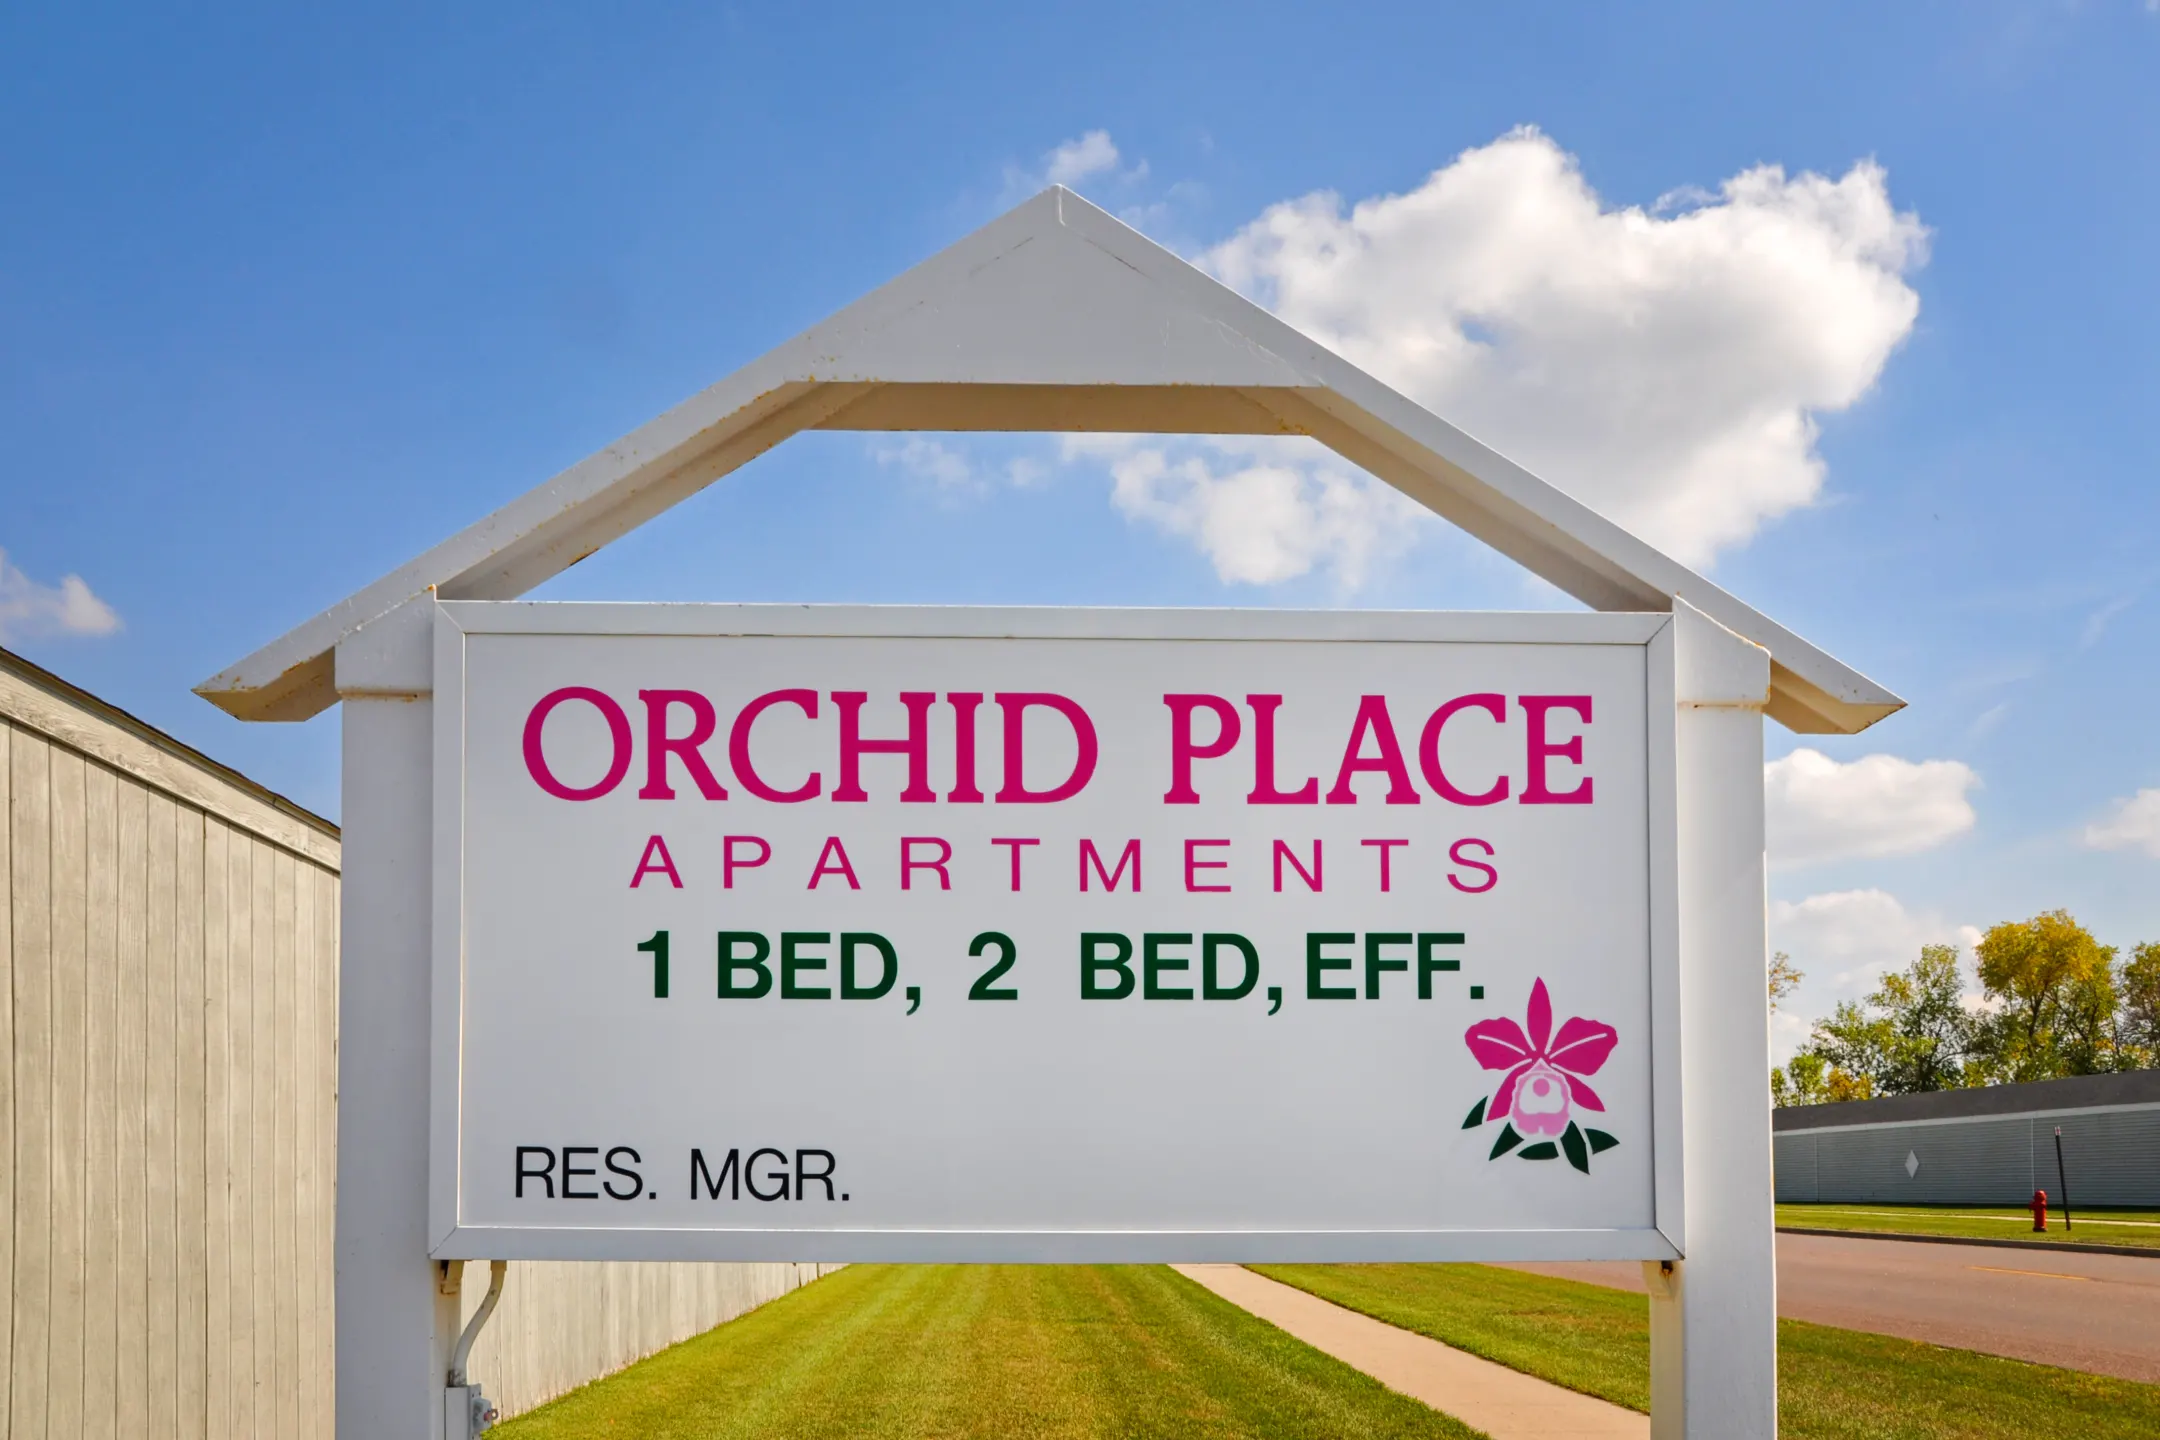 Orchid Place Apartments - Fargo, ND